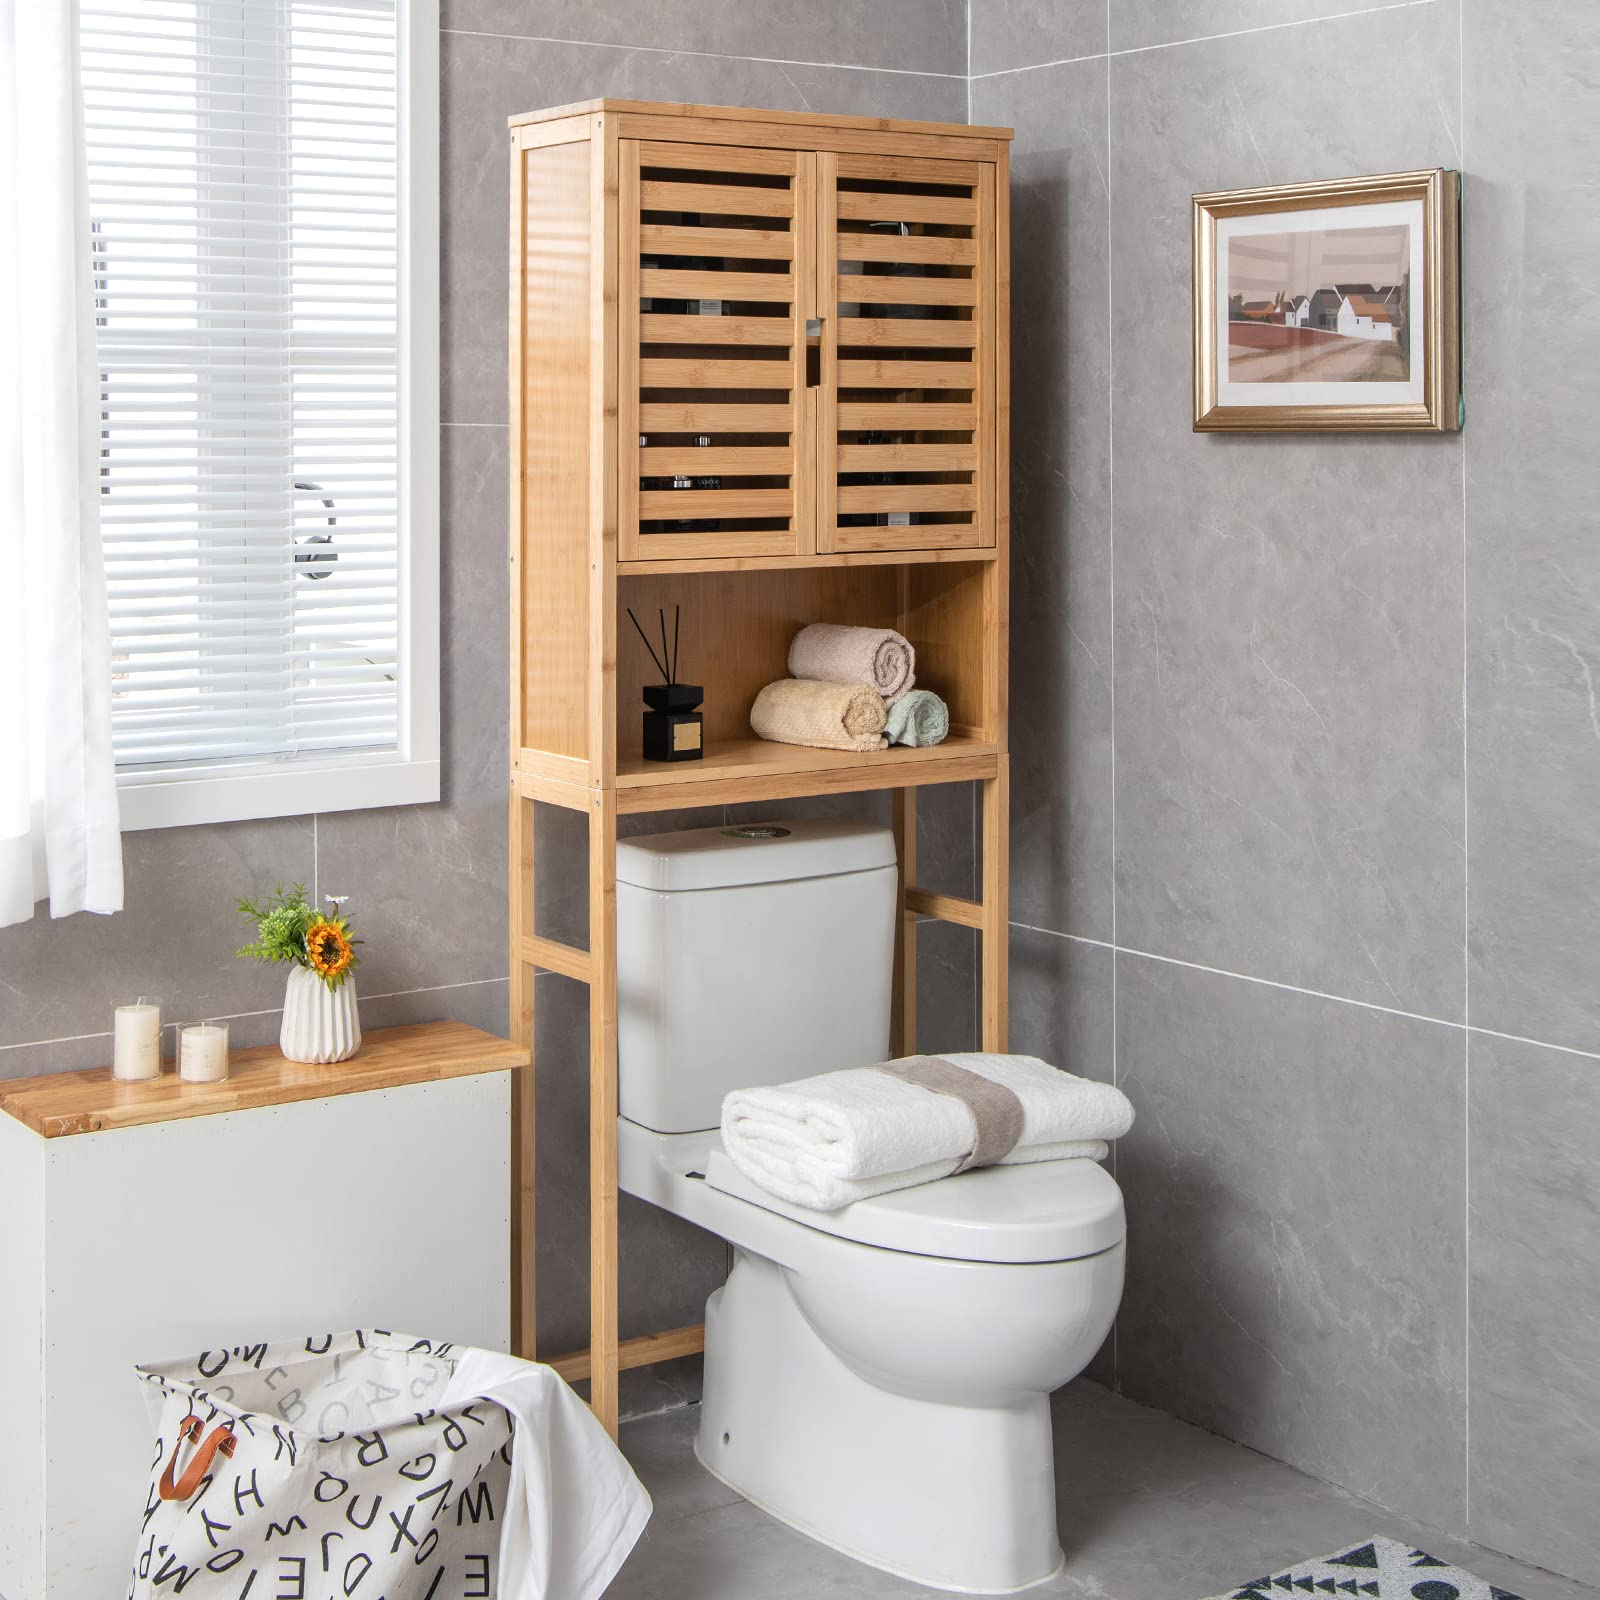 Giantex Over-The-Toilet Storage Cabinet